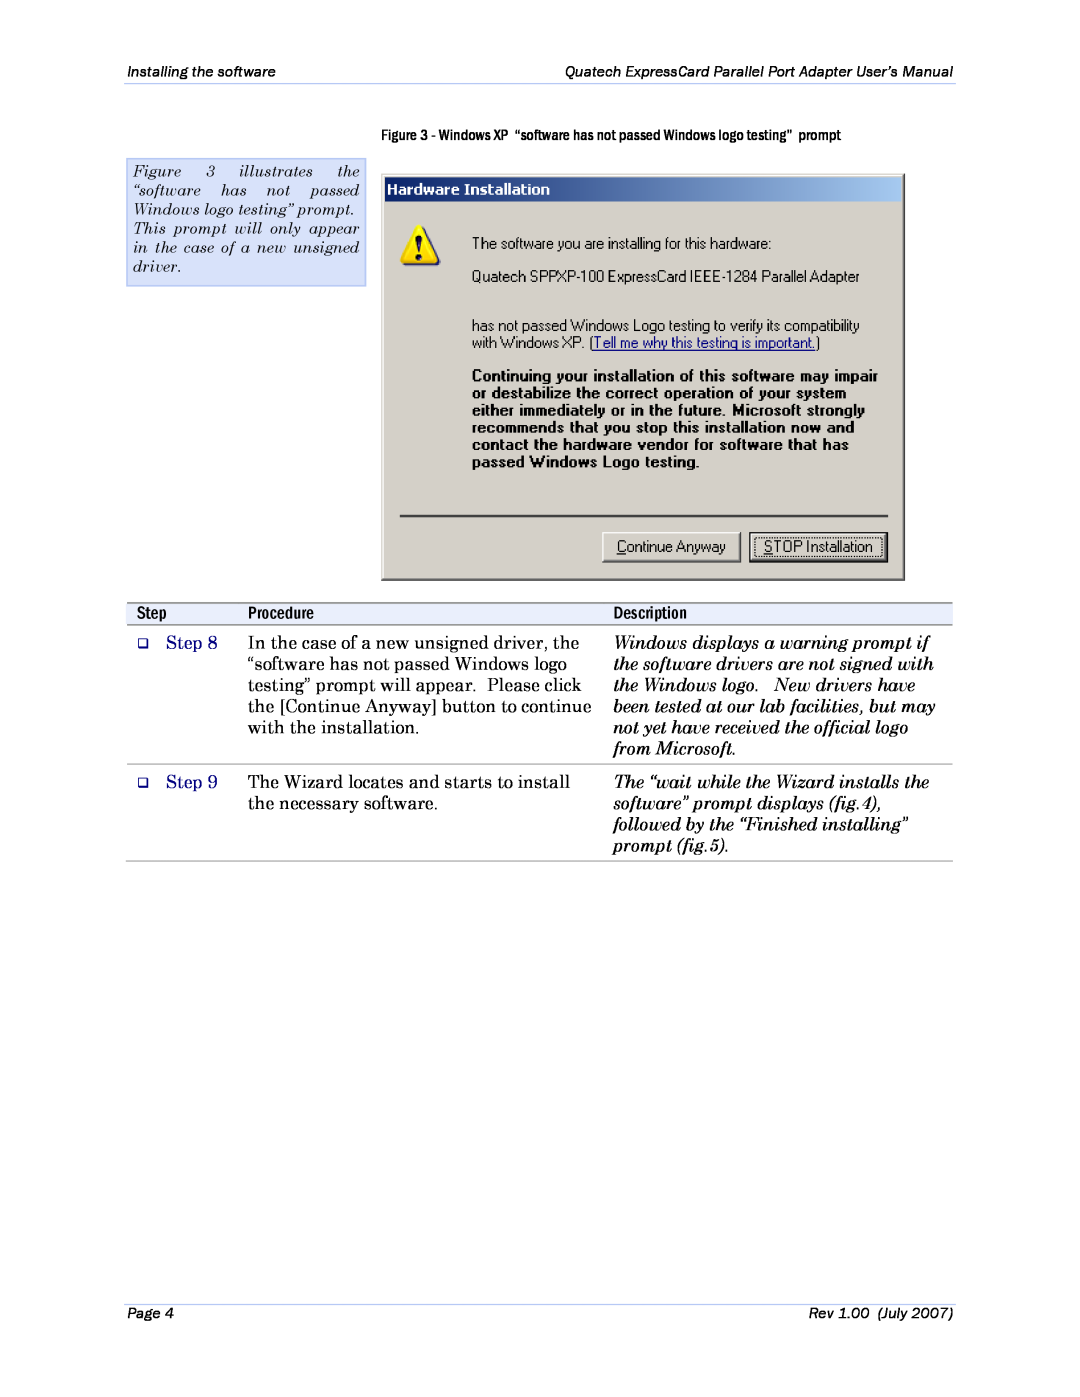 Quatech SPPXP-100 ‰ Step, Windows displays a warning prompt if, the software drivers are not signed with, from Microsoft 